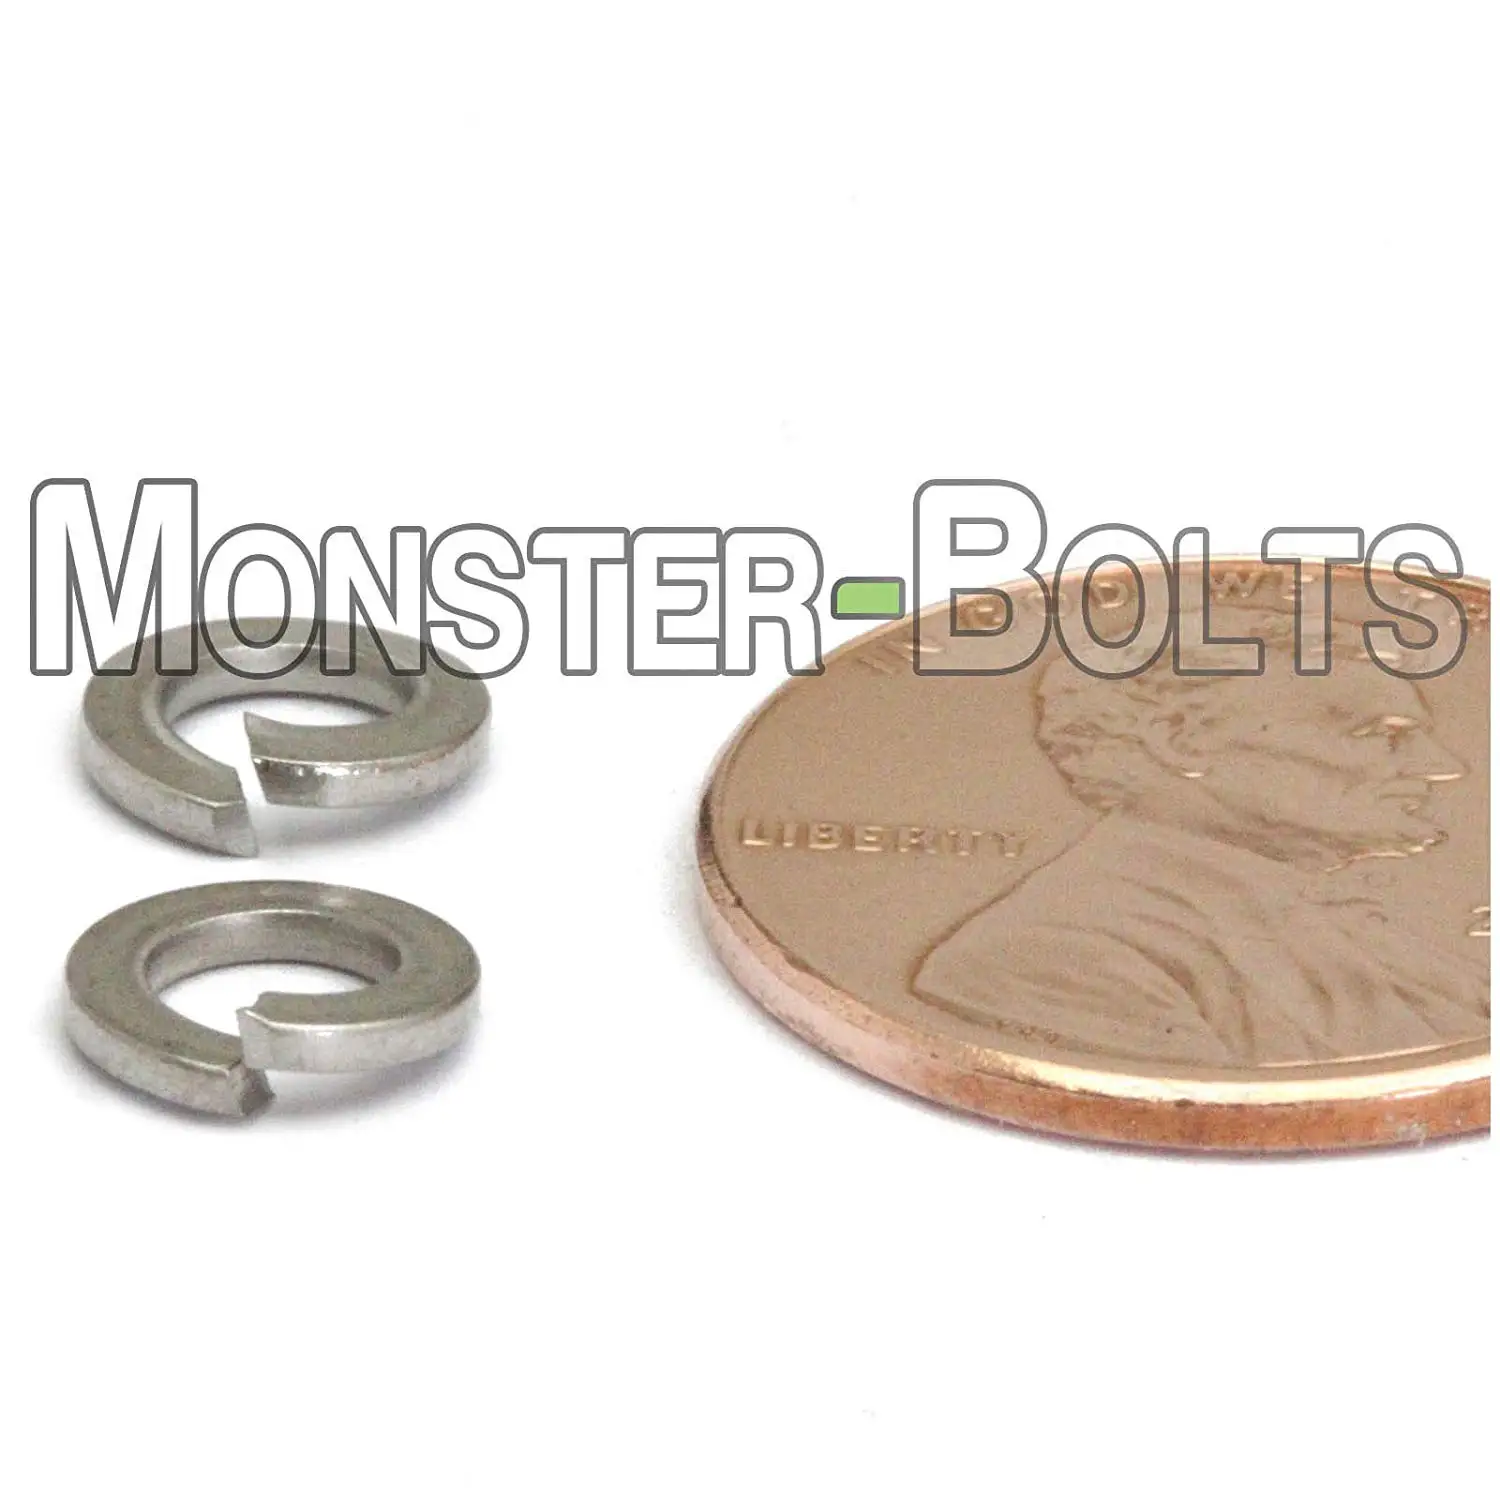 DIN 127B Split Lock Washer Stainless Steel 18-8 Qty 50 A2-70 M6 6mm